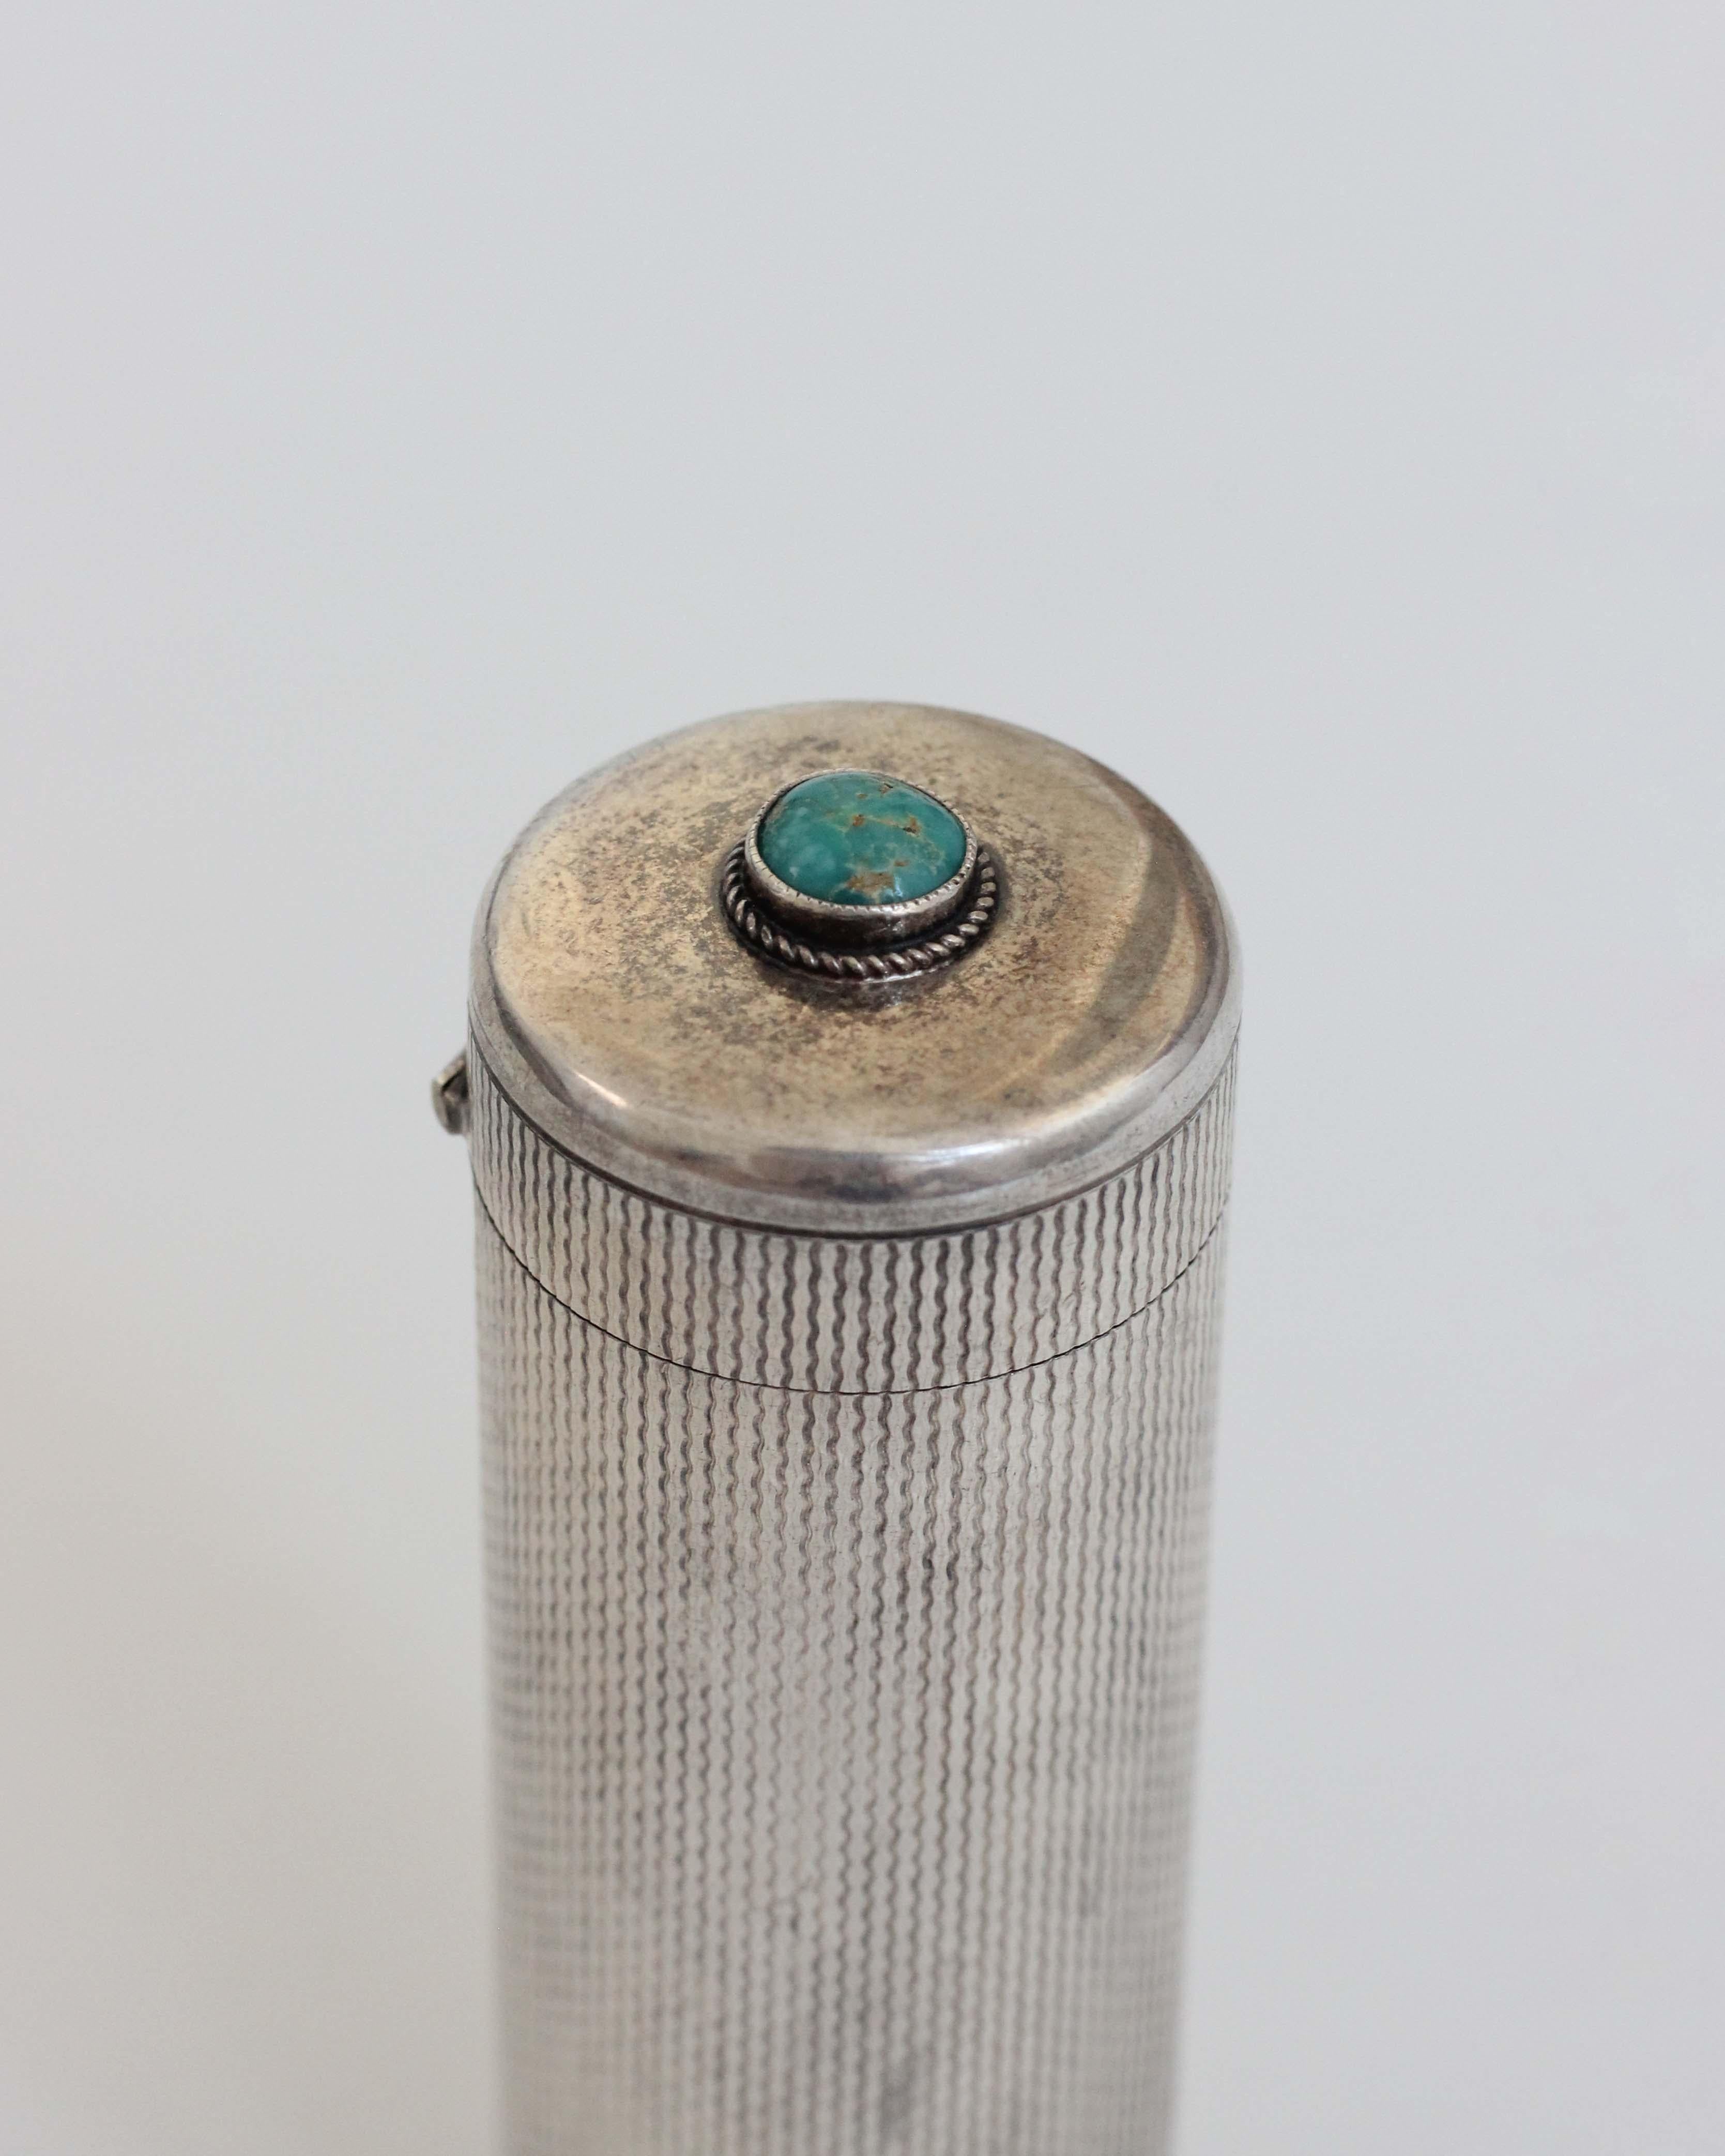 A Handmade Silver Scent Box or Match Case, Sweden, 1920's Decorative Silver Box  In Good Condition For Sale In Los Angeles, CA